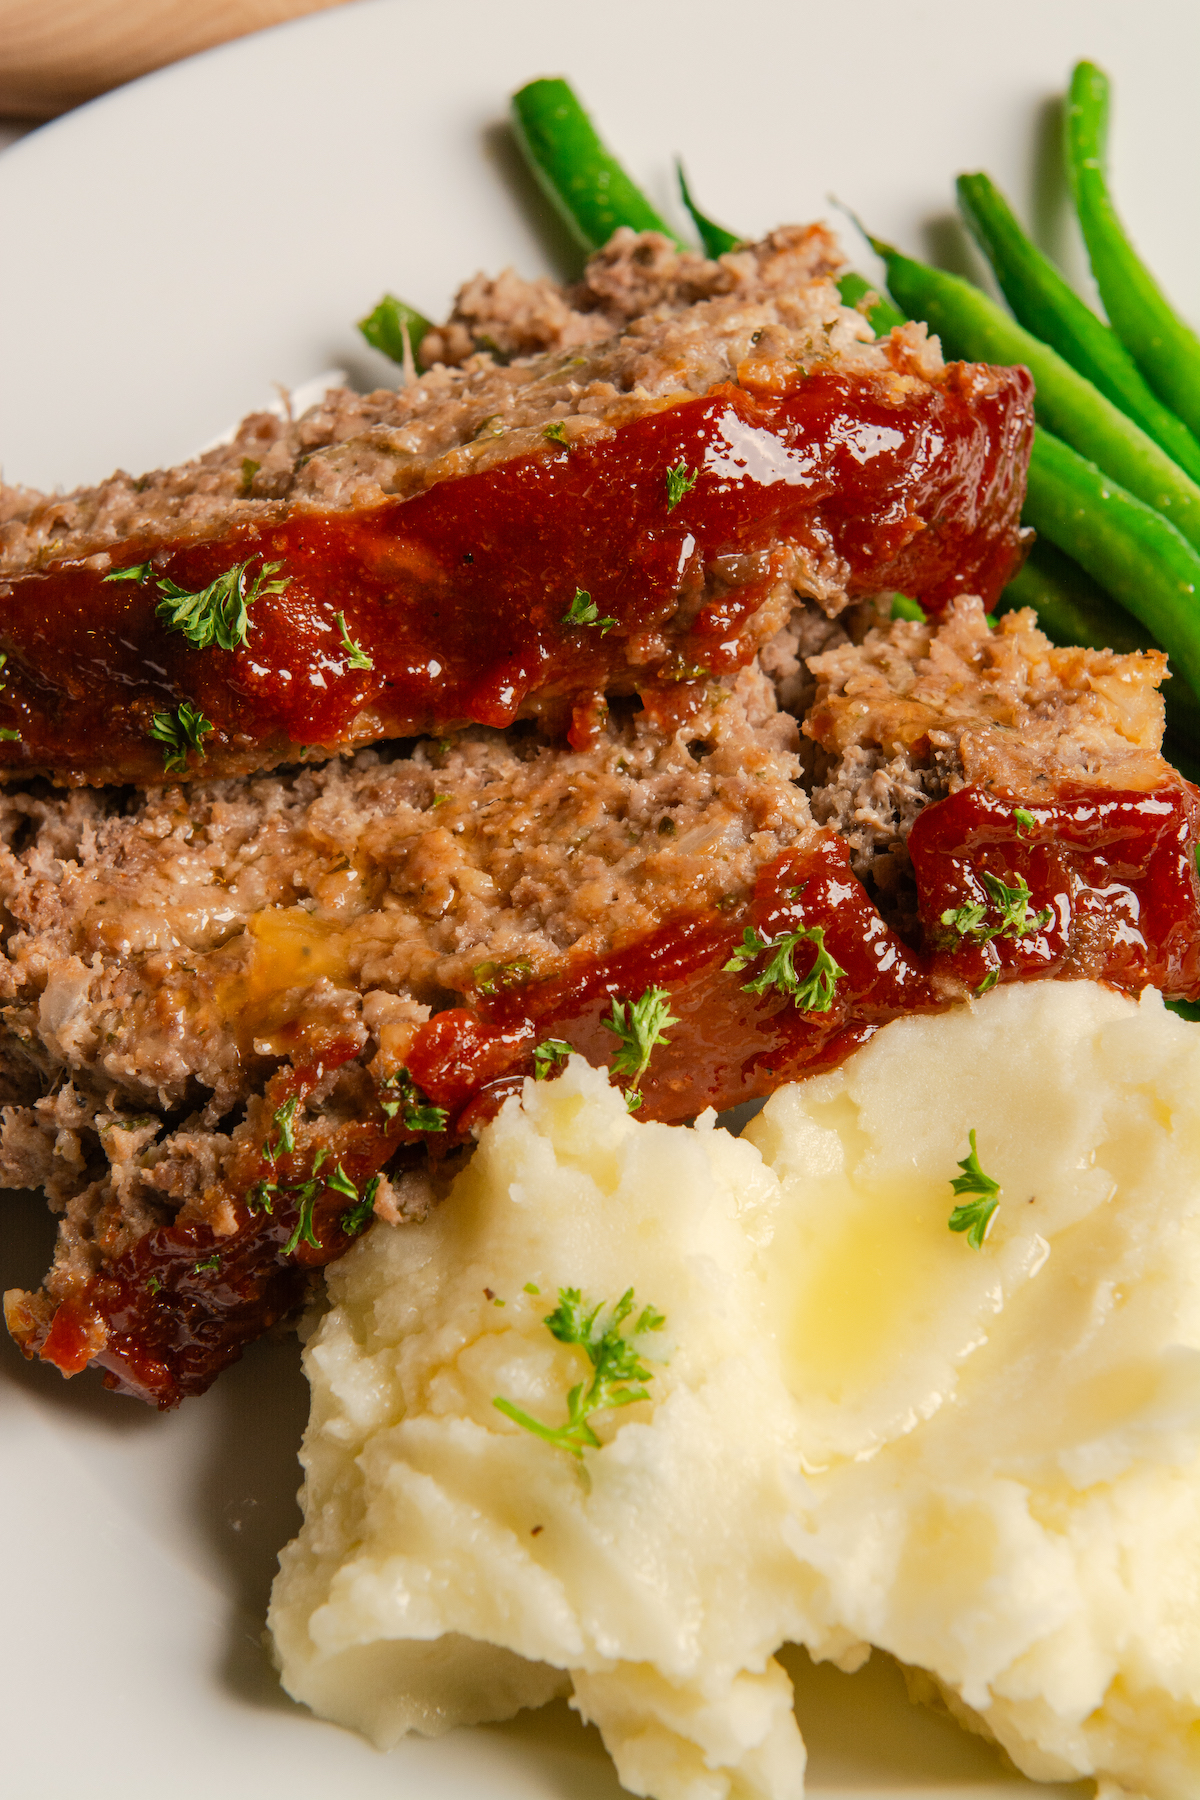 Meatloaf with sweet sauce with a side of green beans and mashed potatoes